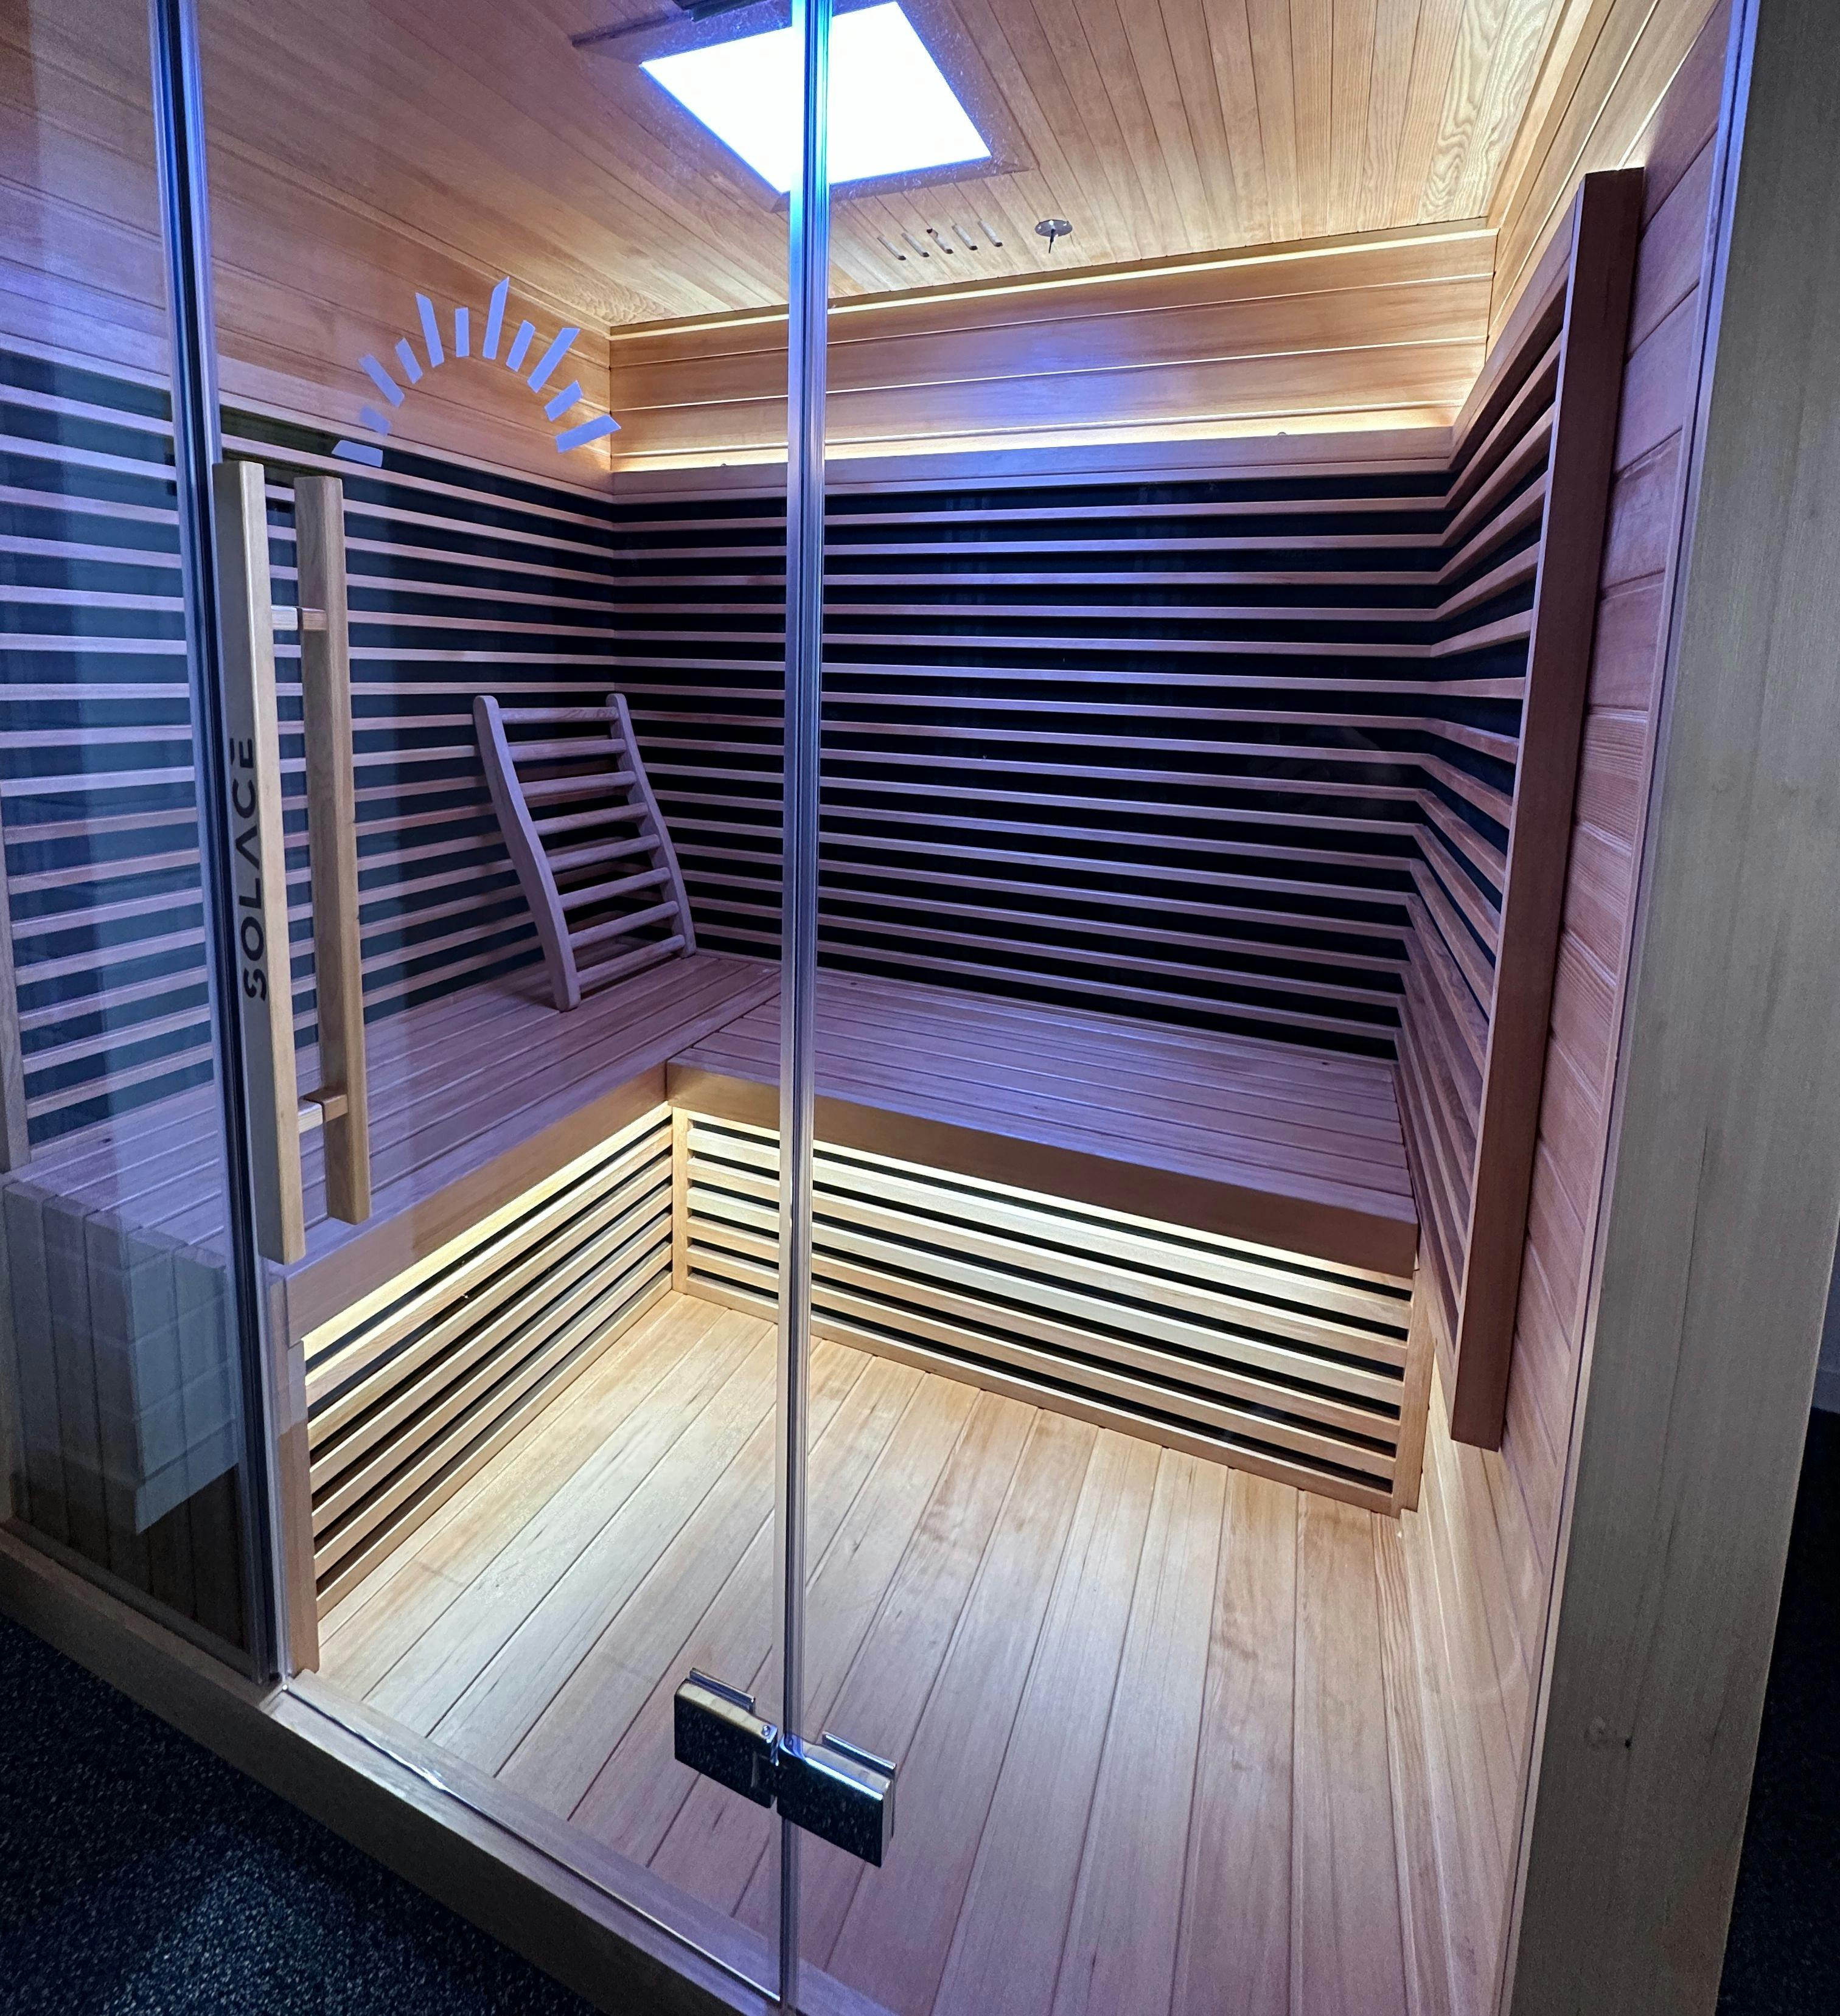 Our Solace UV sauna will relax and recover your tired body efficiently in comfort.